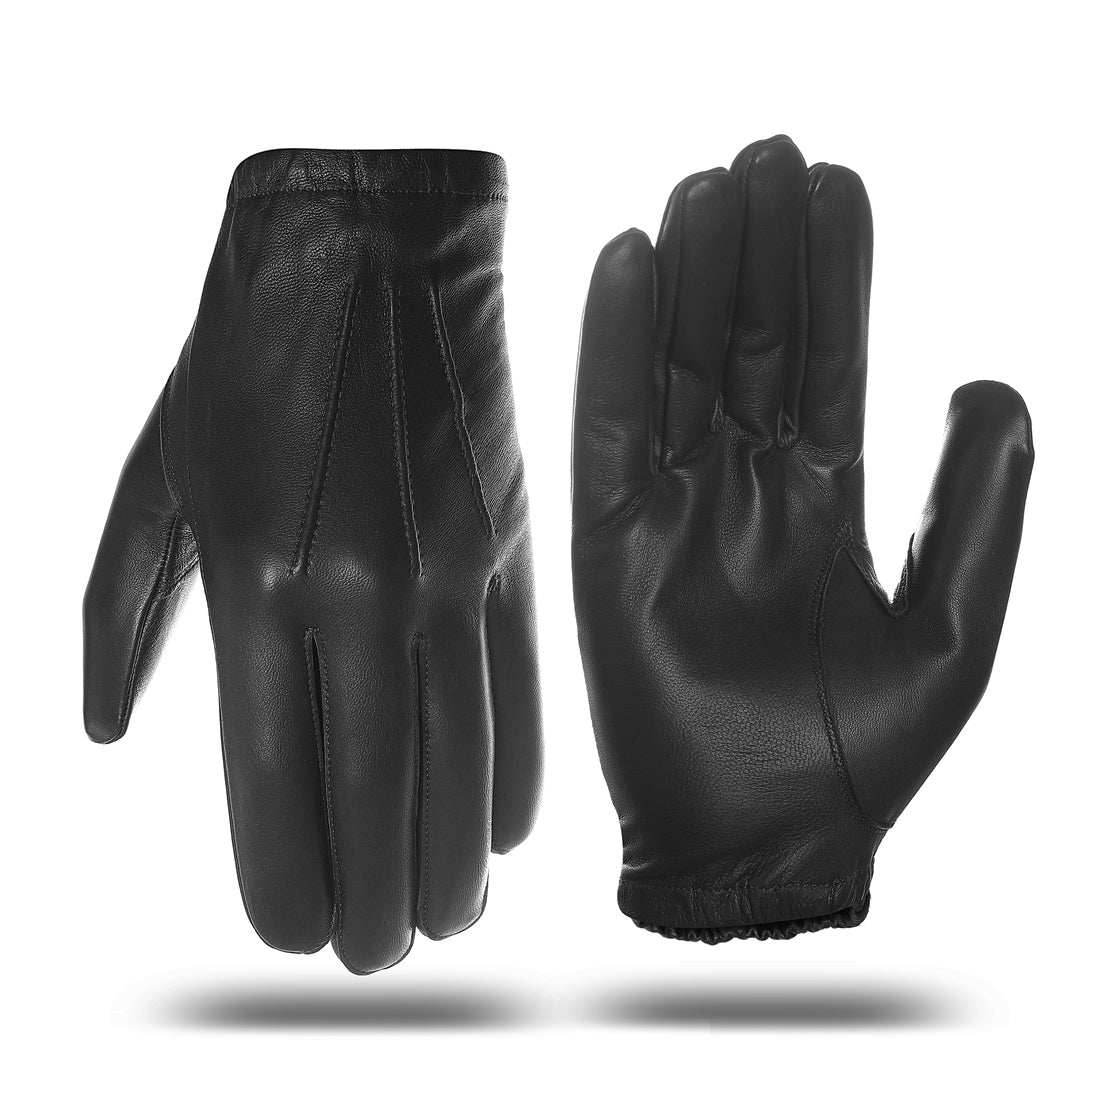 Men Police Search Driving Gloves Great Dexterity Strong Grip Thin